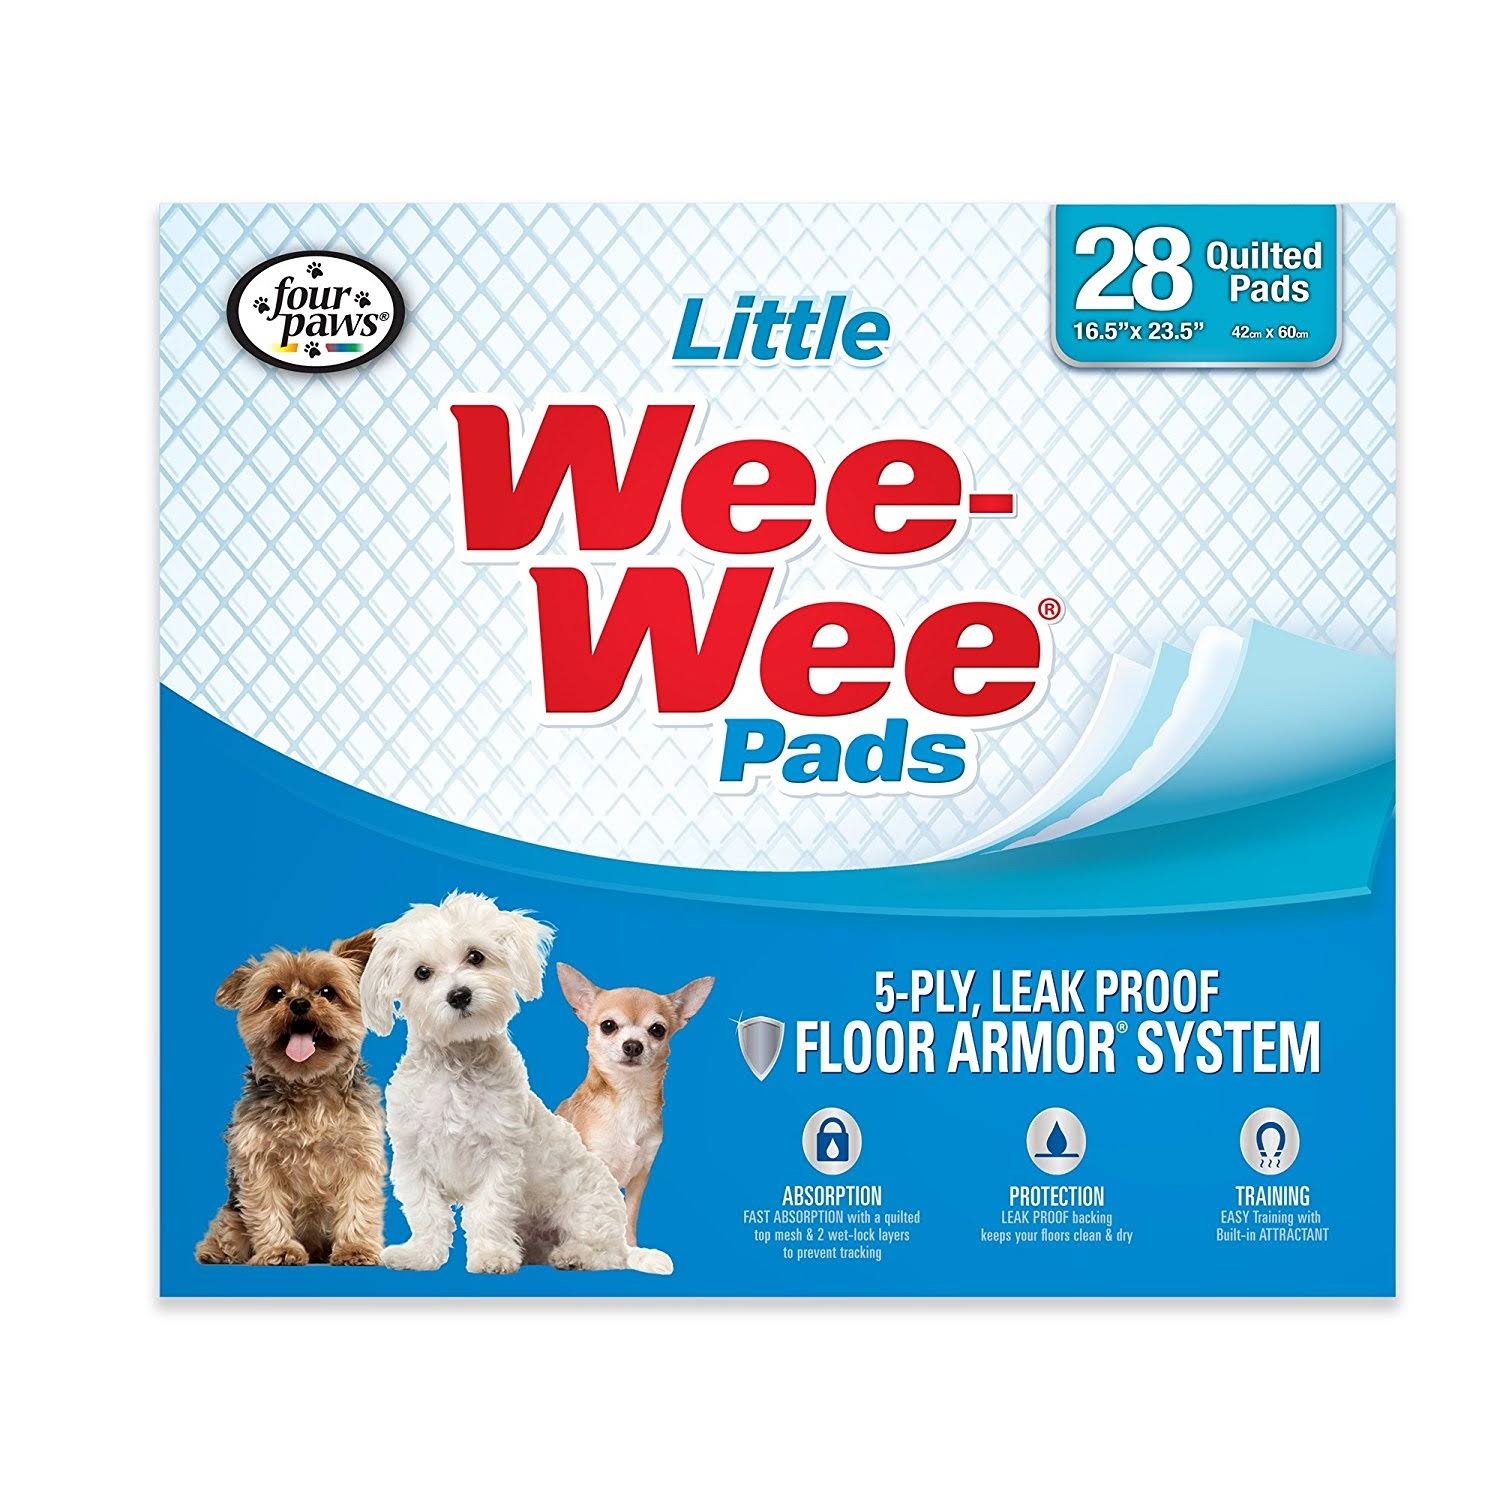 Four Paws Products Lil Dog Wee Wee Pads - 28 Quilted Pads